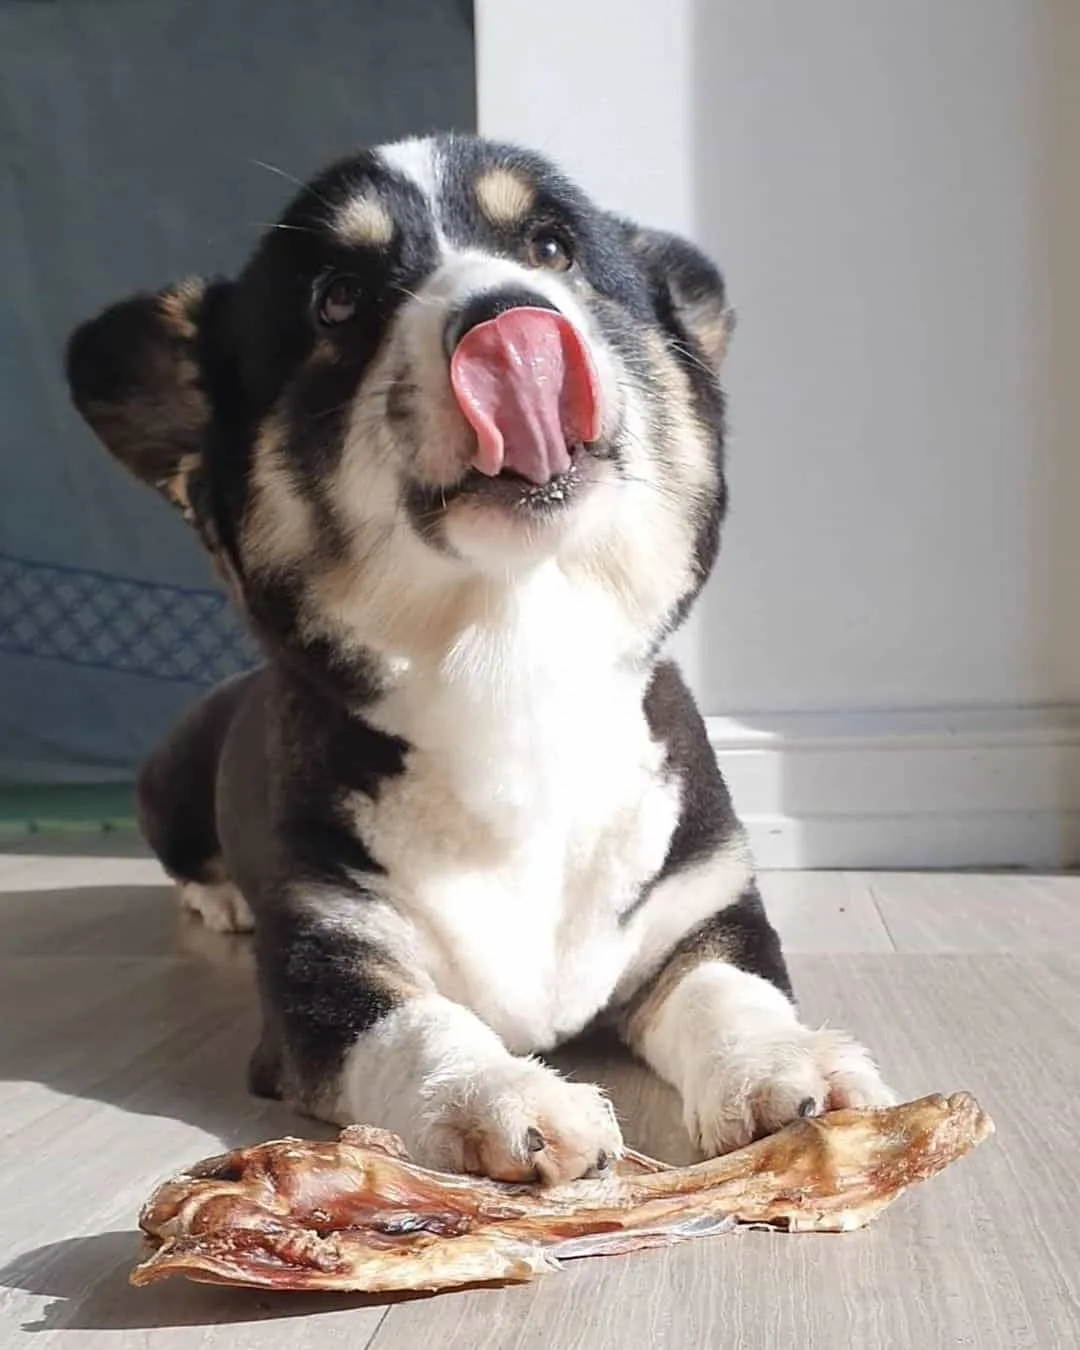 cute dog licking his mouth after the meal